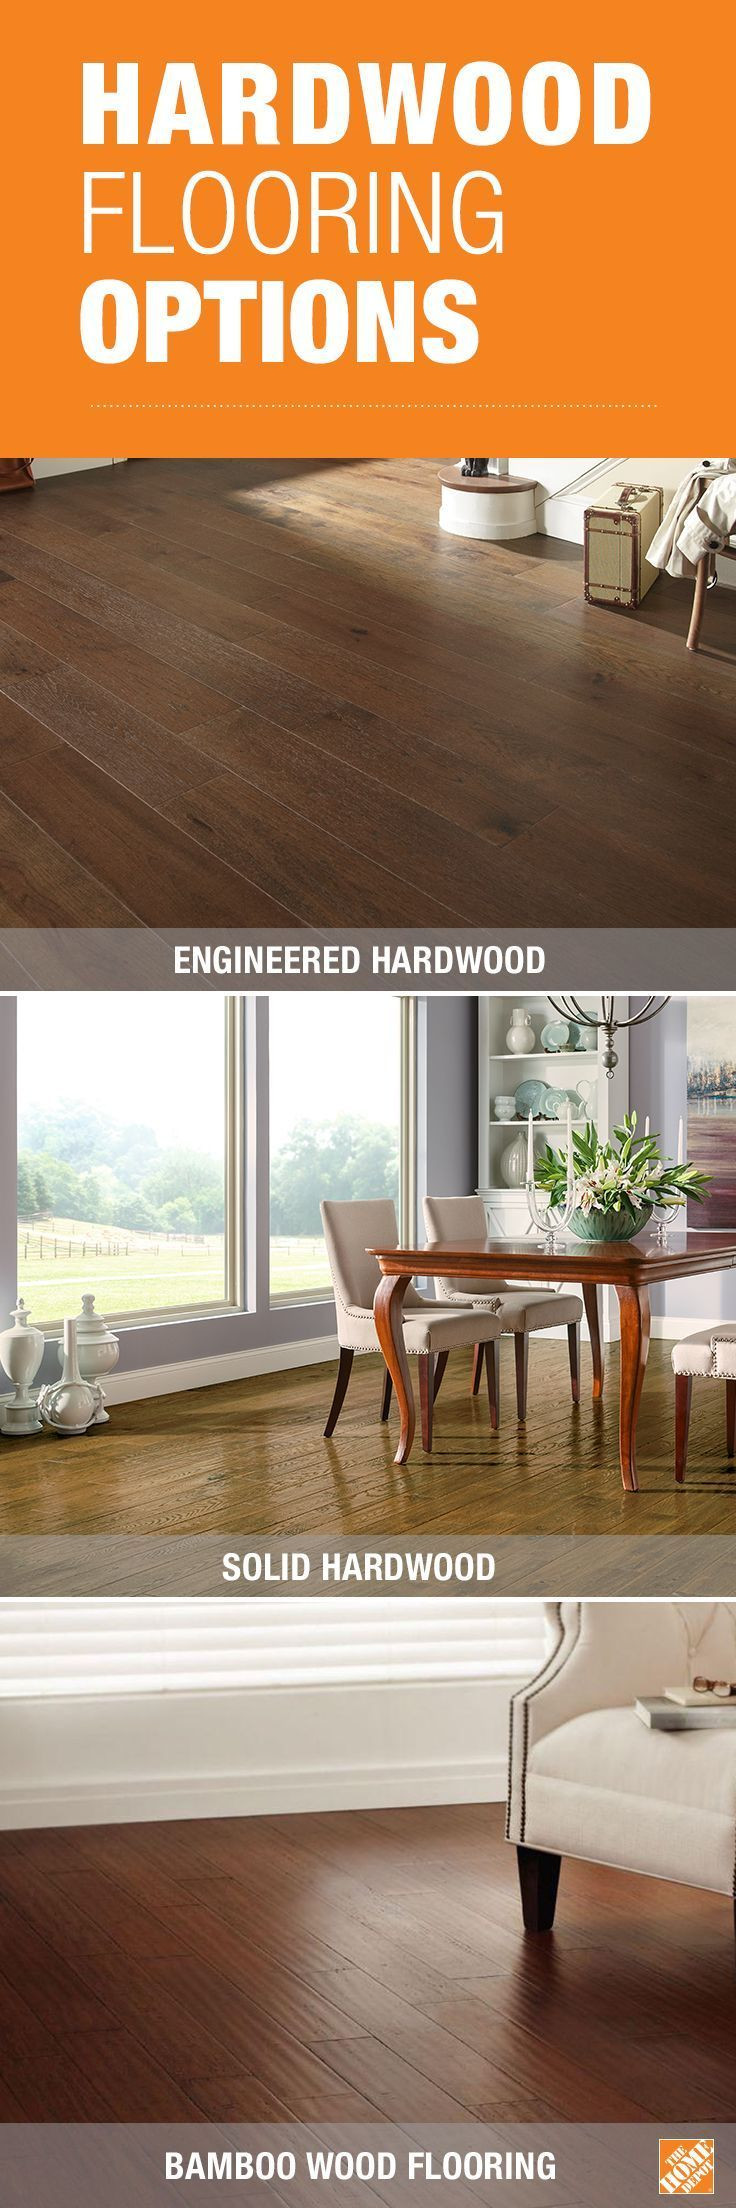 26 Trendy Home Depot solid Hardwood Flooring 2023 free download home depot solid hardwood flooring of 40 tongue and groove porch flooring home depot ideas pertaining to 21 best front porch restoration images on pinterest concept of tongue and groove porc